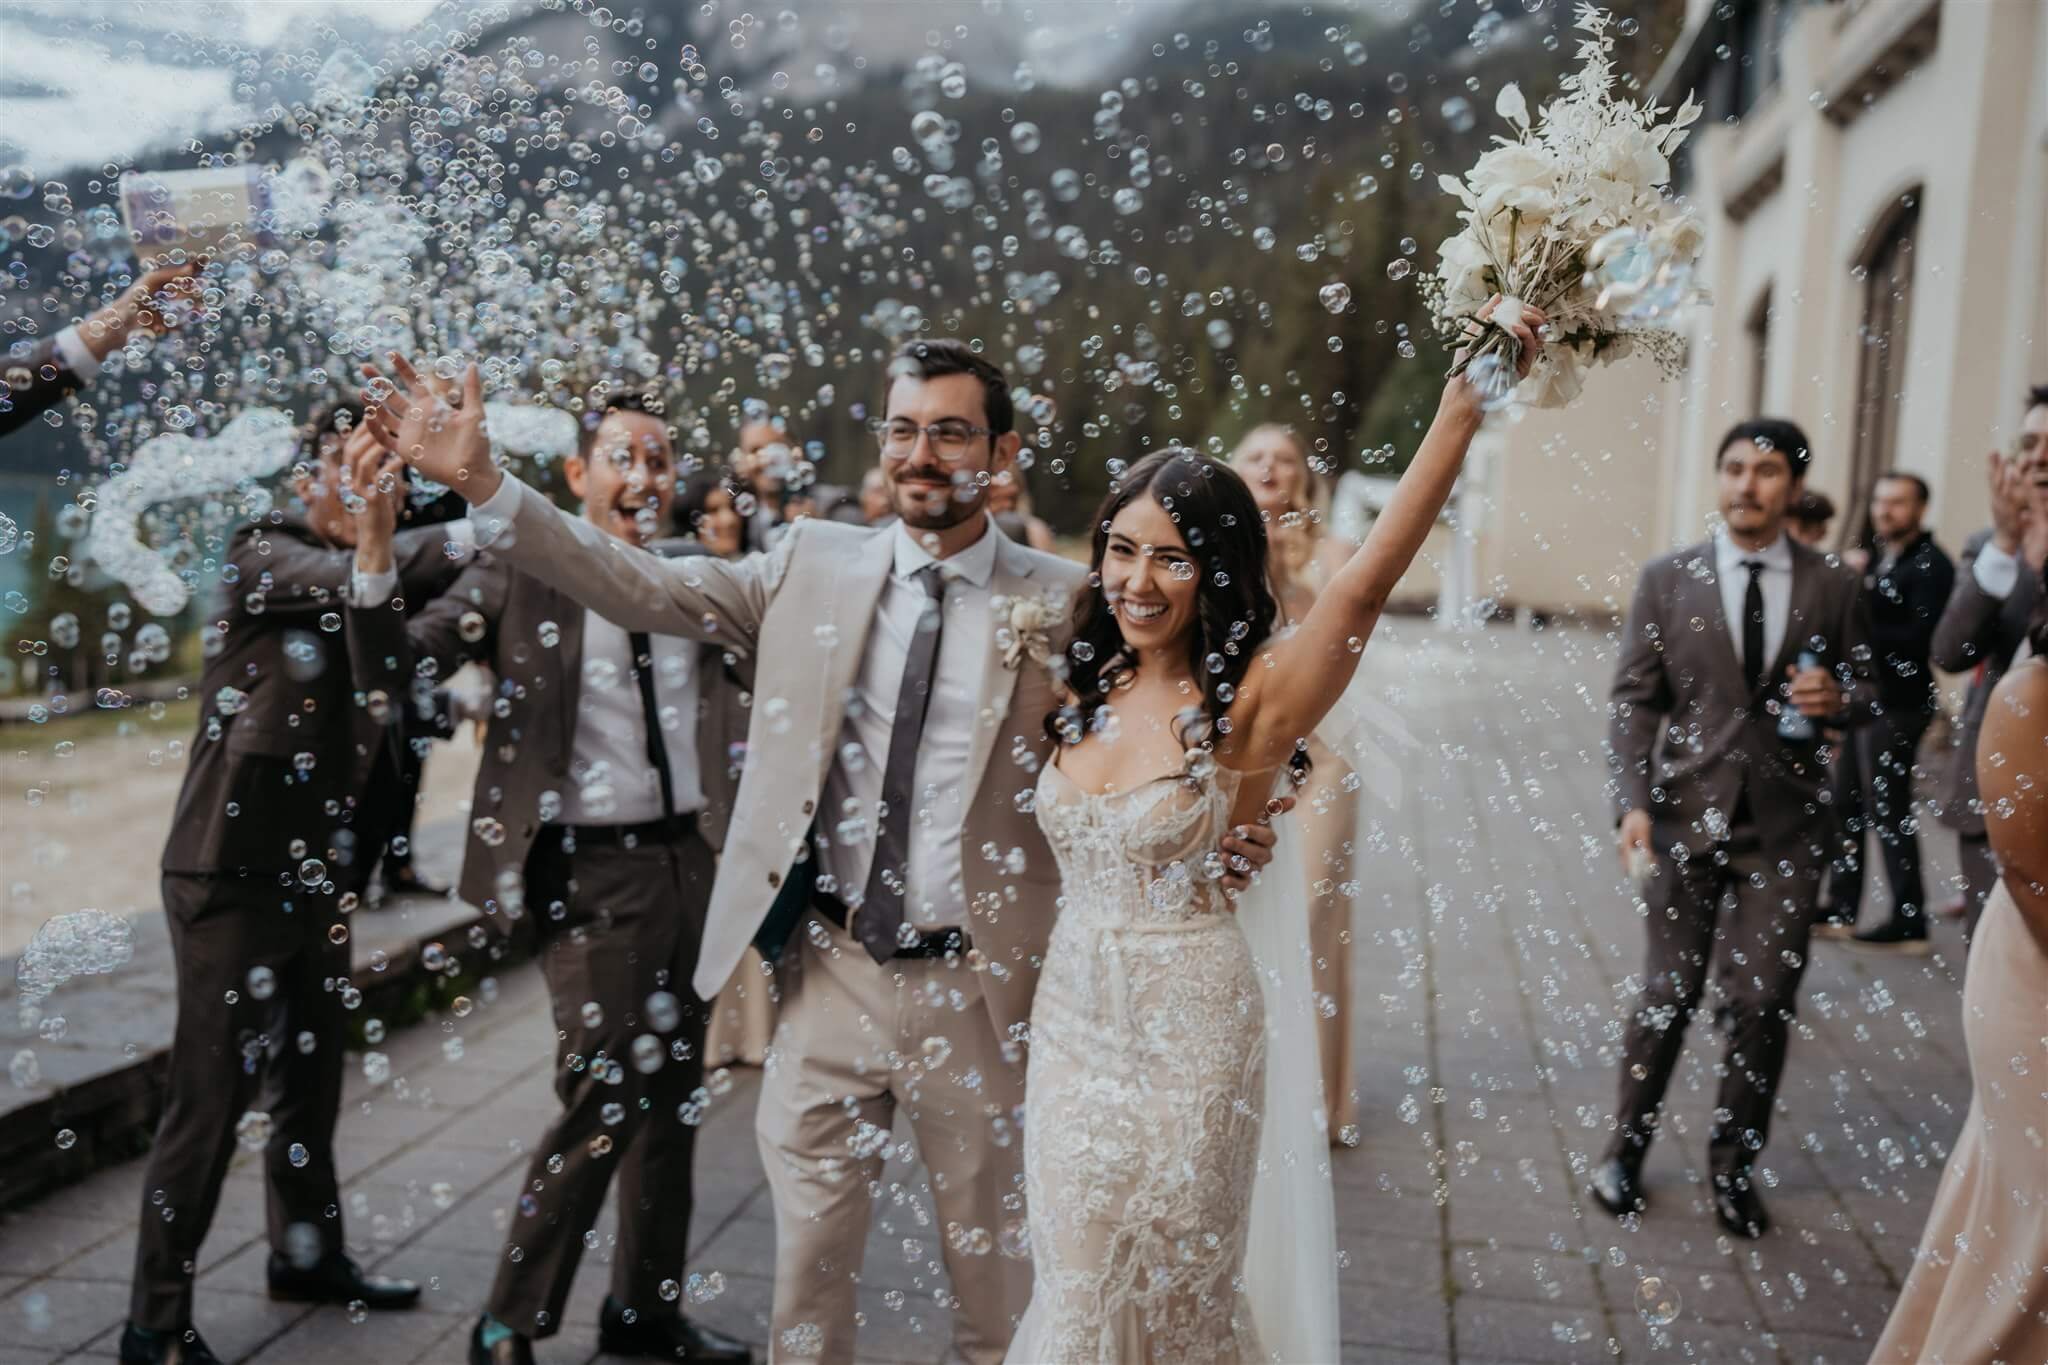 Bride and groom cheer while guests blow bubbles at Lake Louise wedding in Alberta Canada